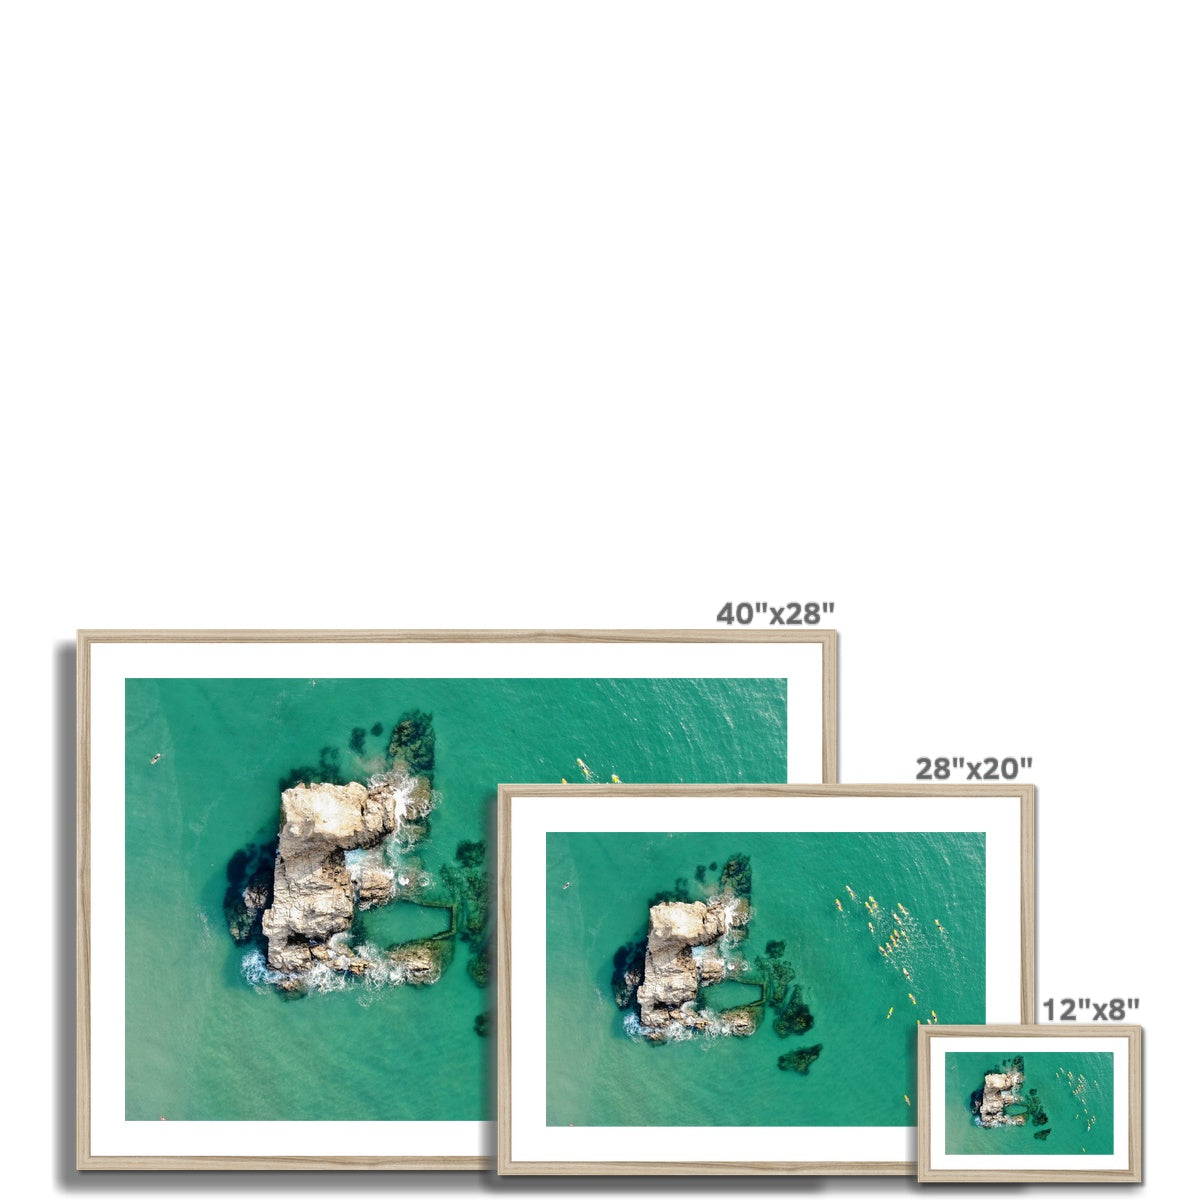 surf club chapel rock wooden frame sizes